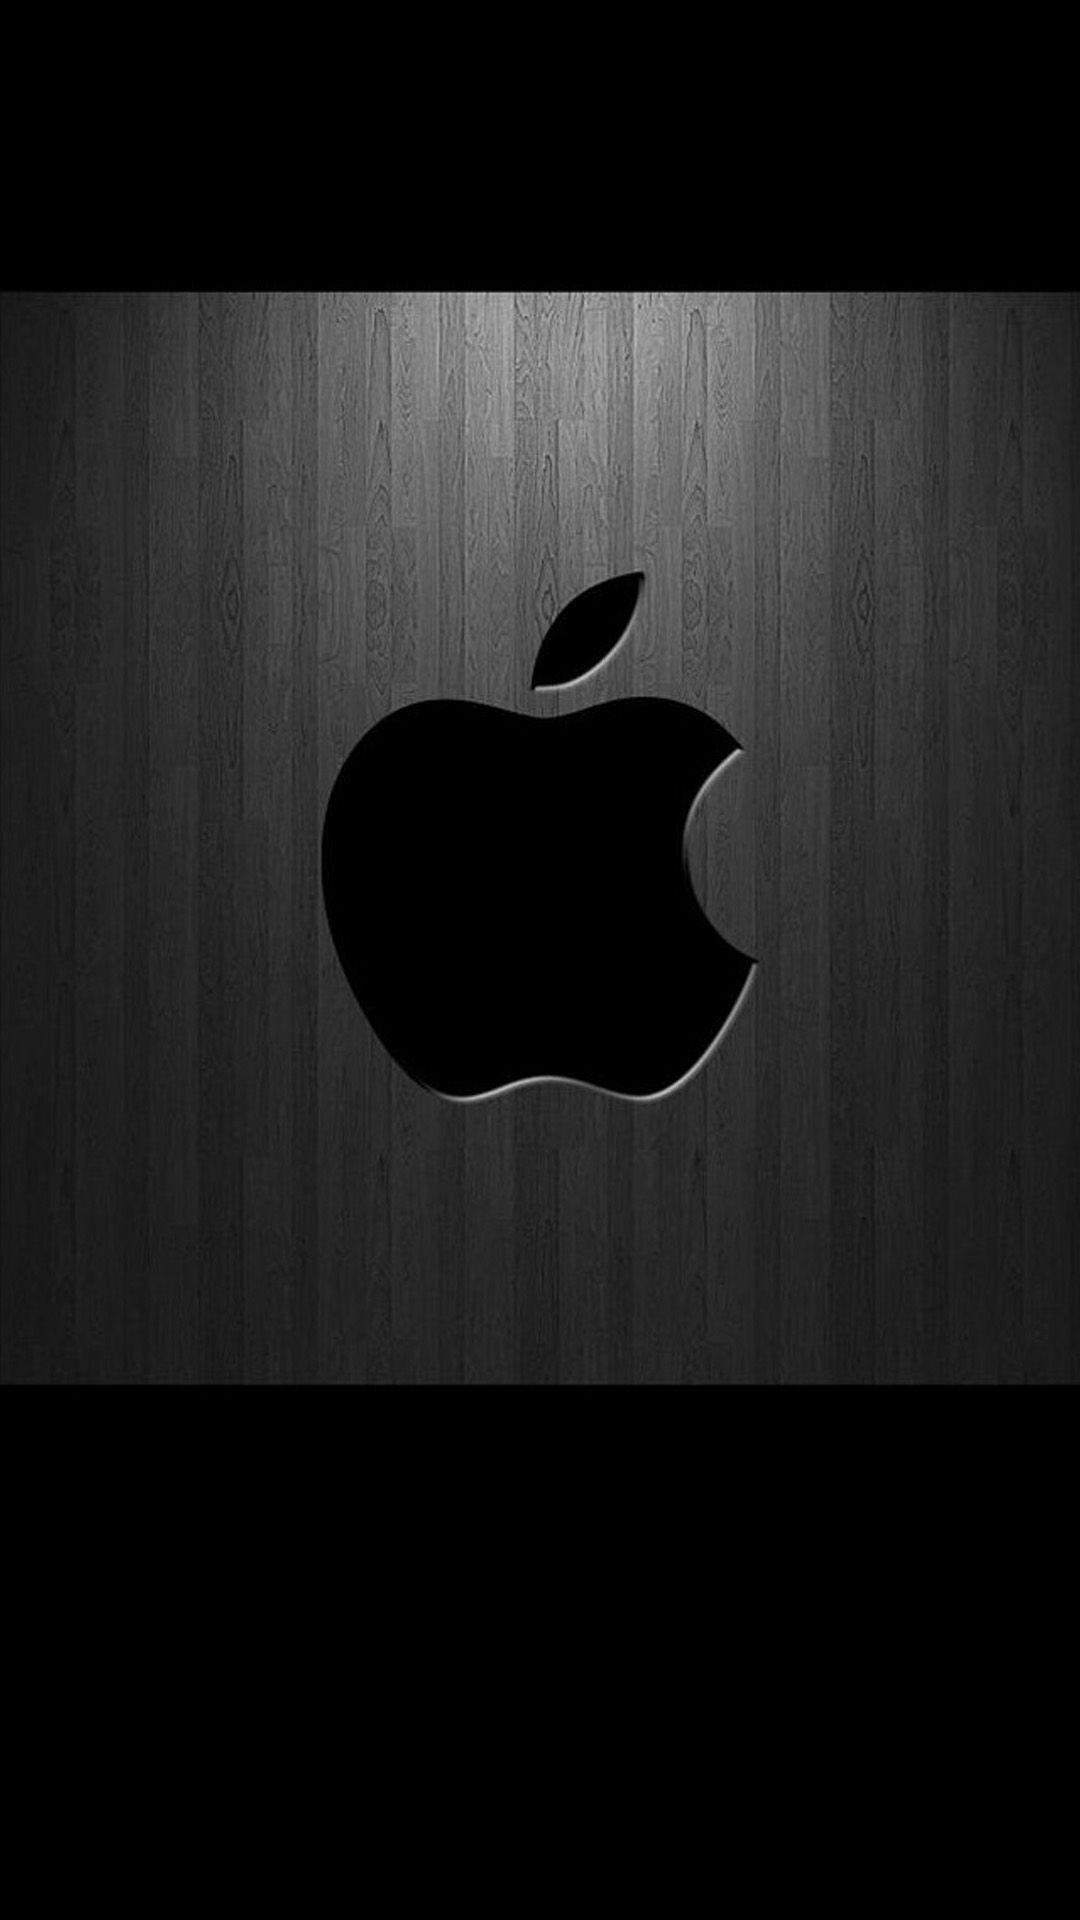 On Black Background iPhone Logo - Download Free Apple Logo Background for iPhone